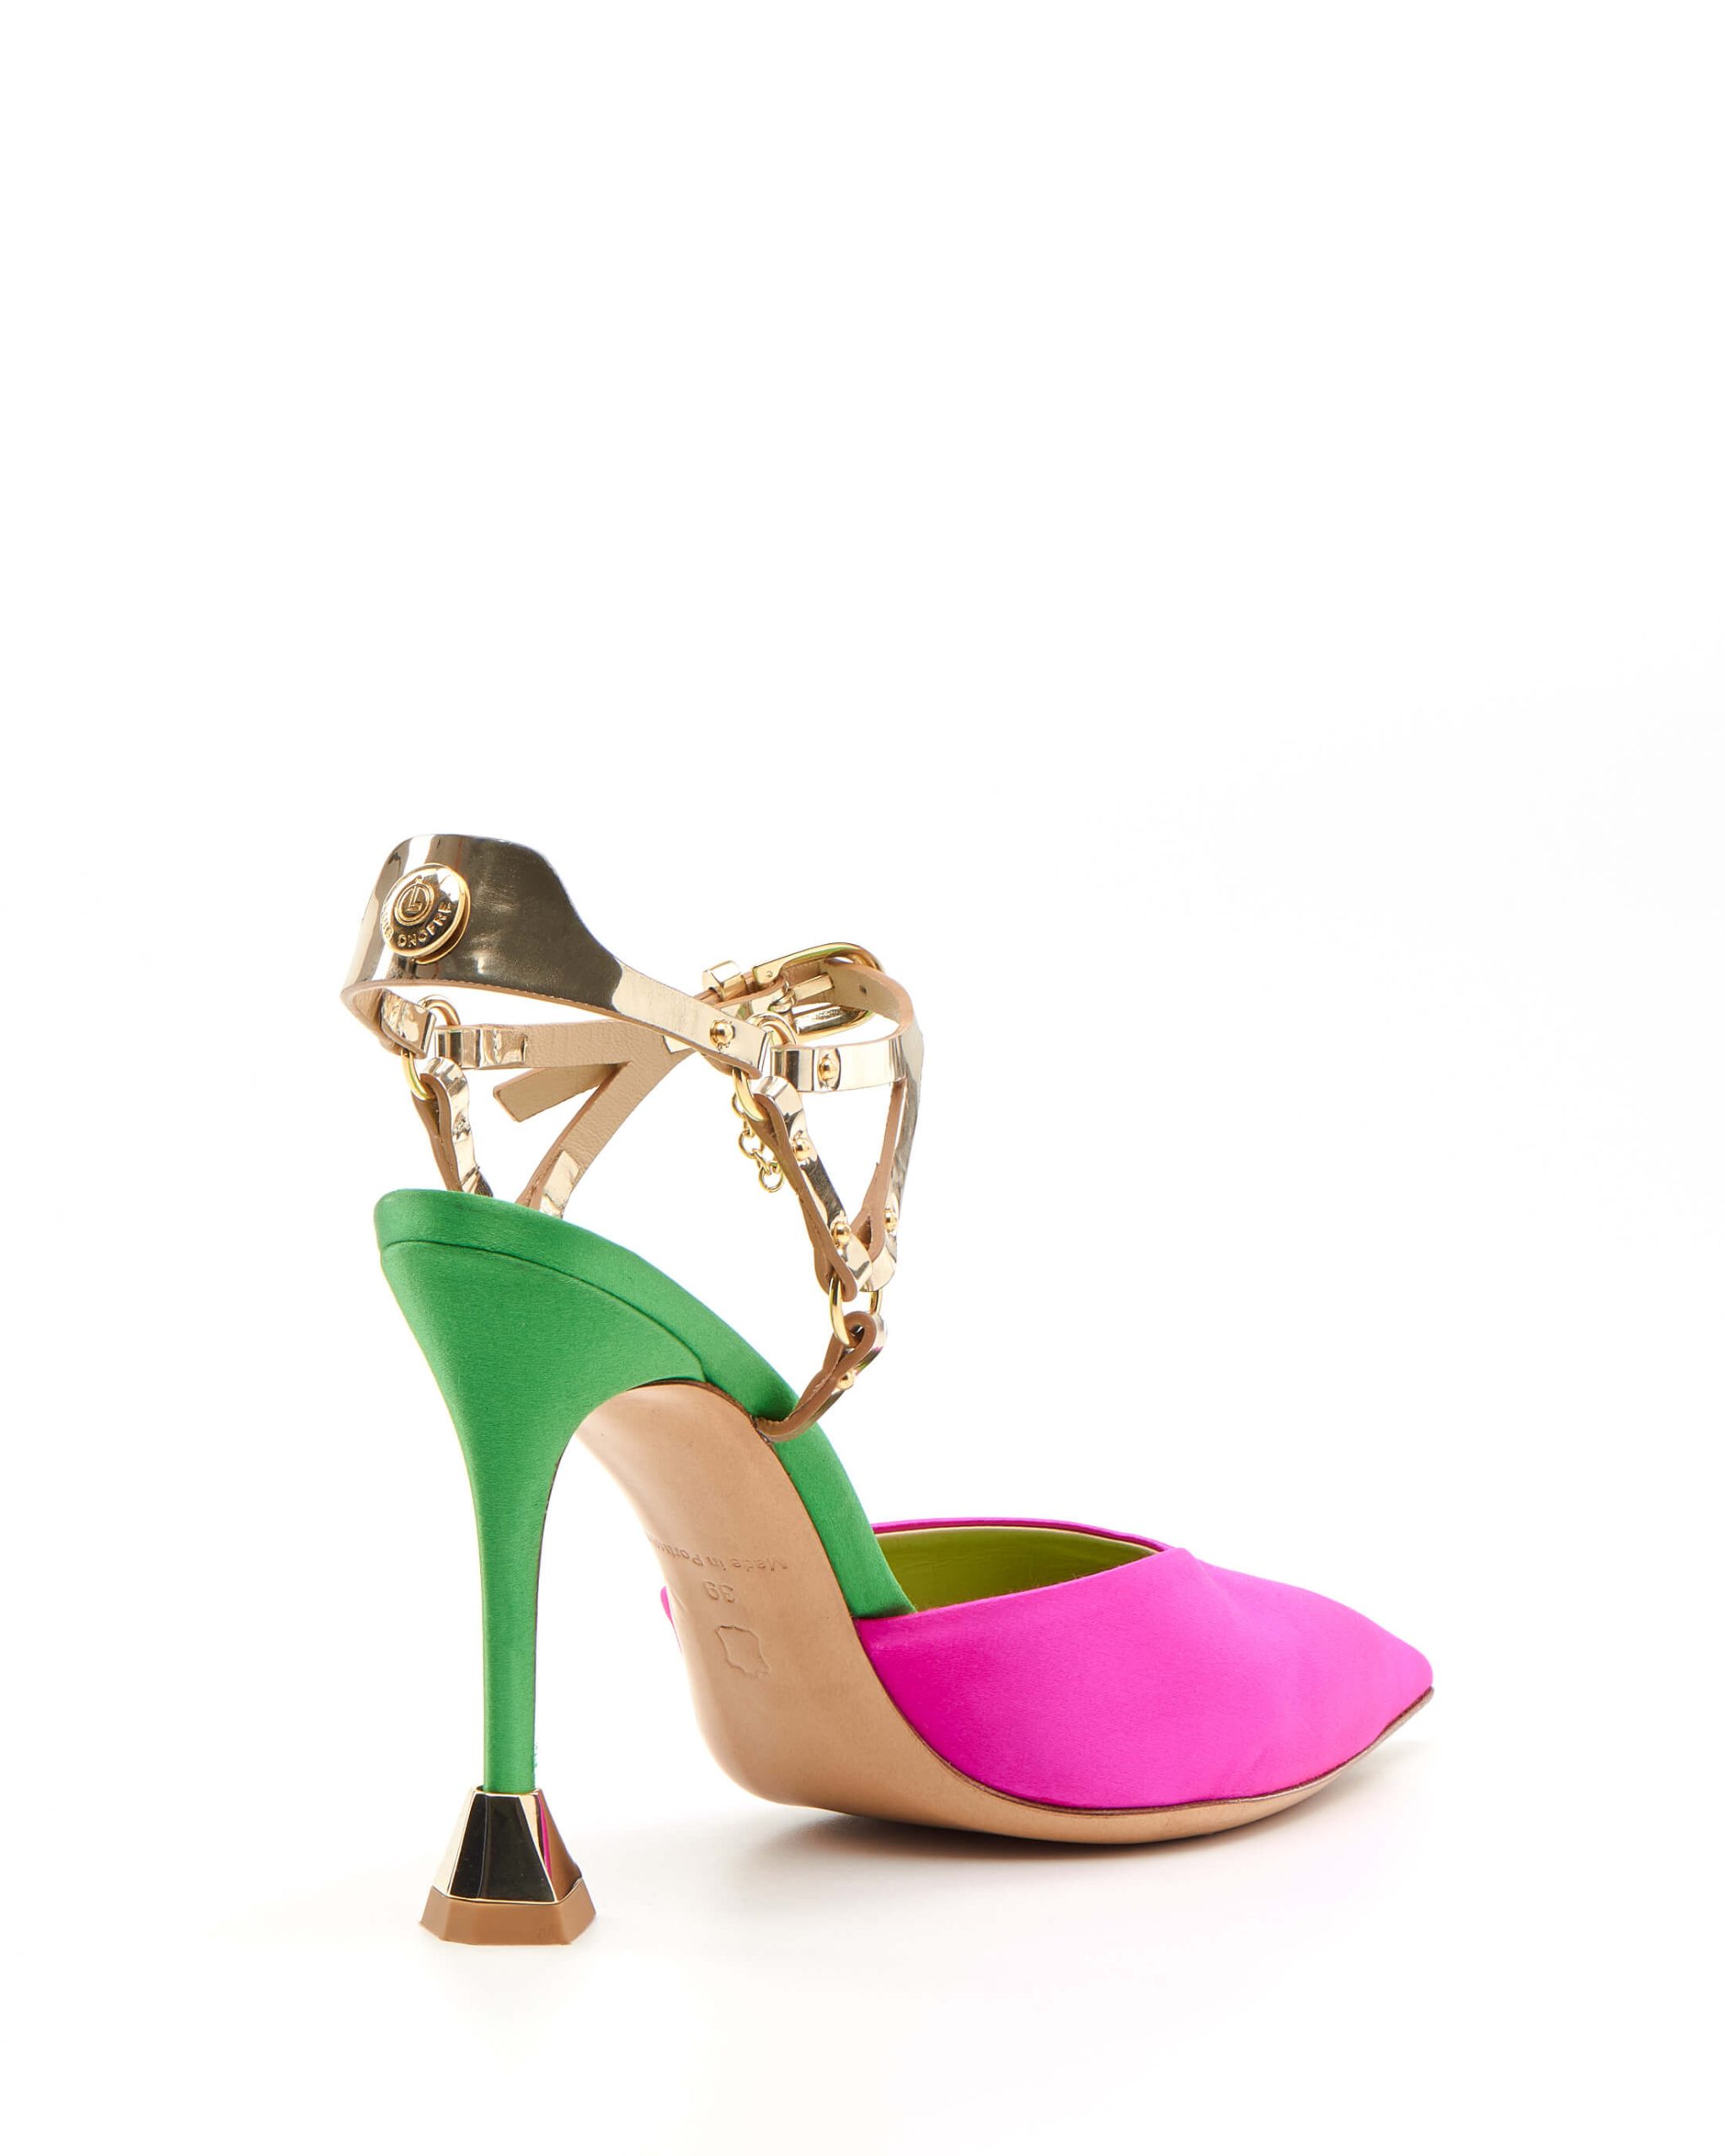 Luis Onofre Portuguese Shoes FW22 – 5373_01MF – Hades pink and green-3